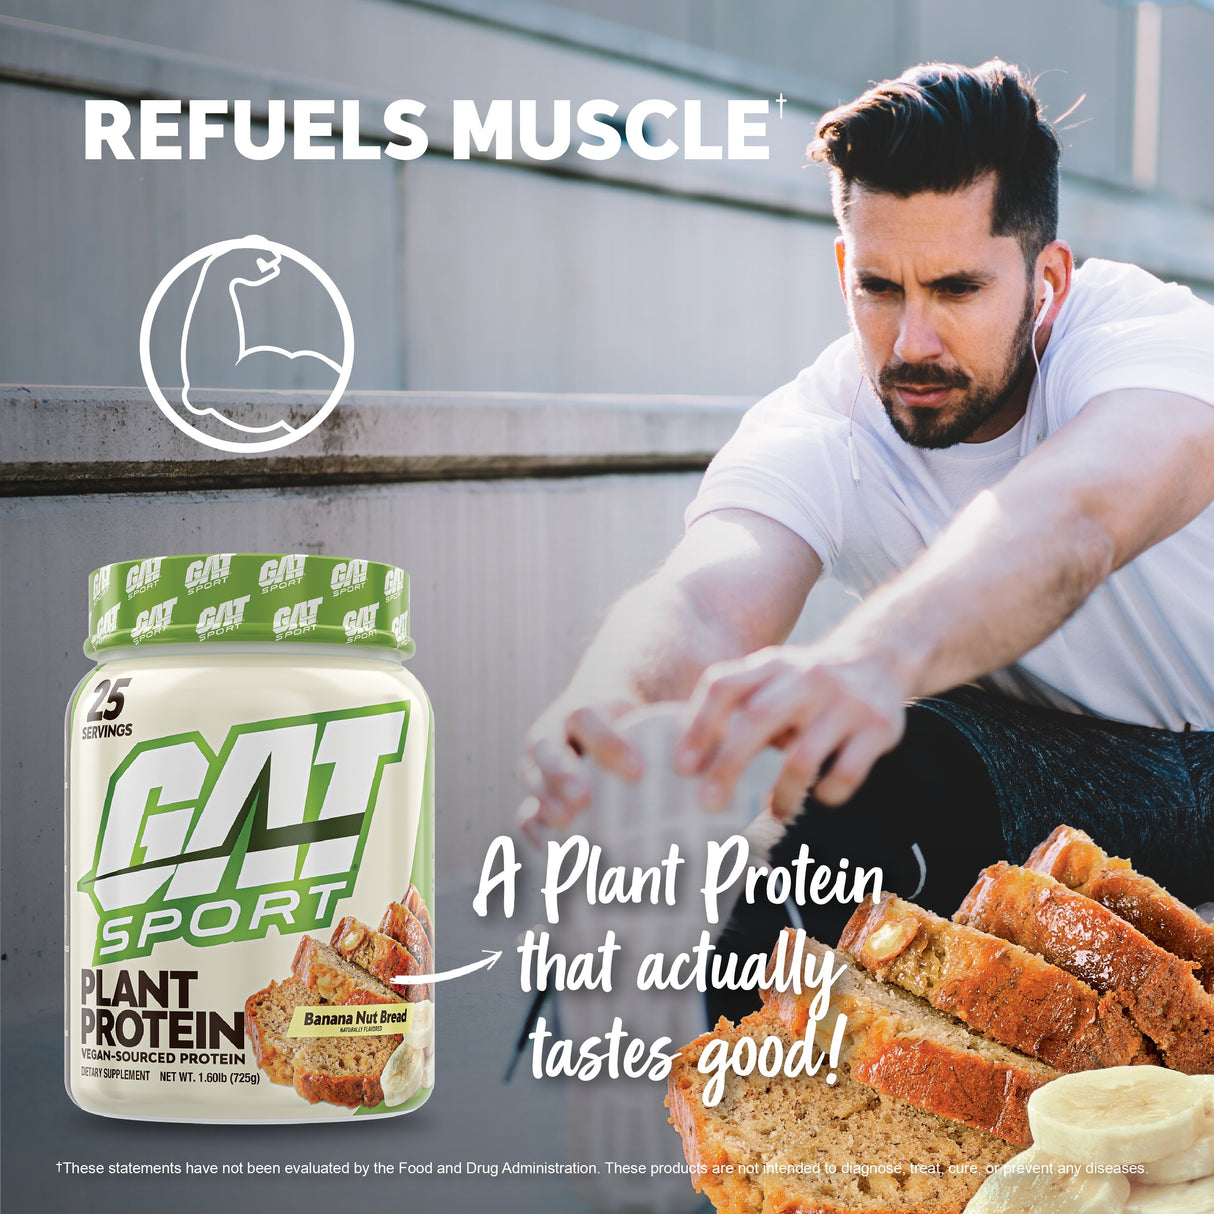 GAT SPORT Plant Protein - refuels muscle